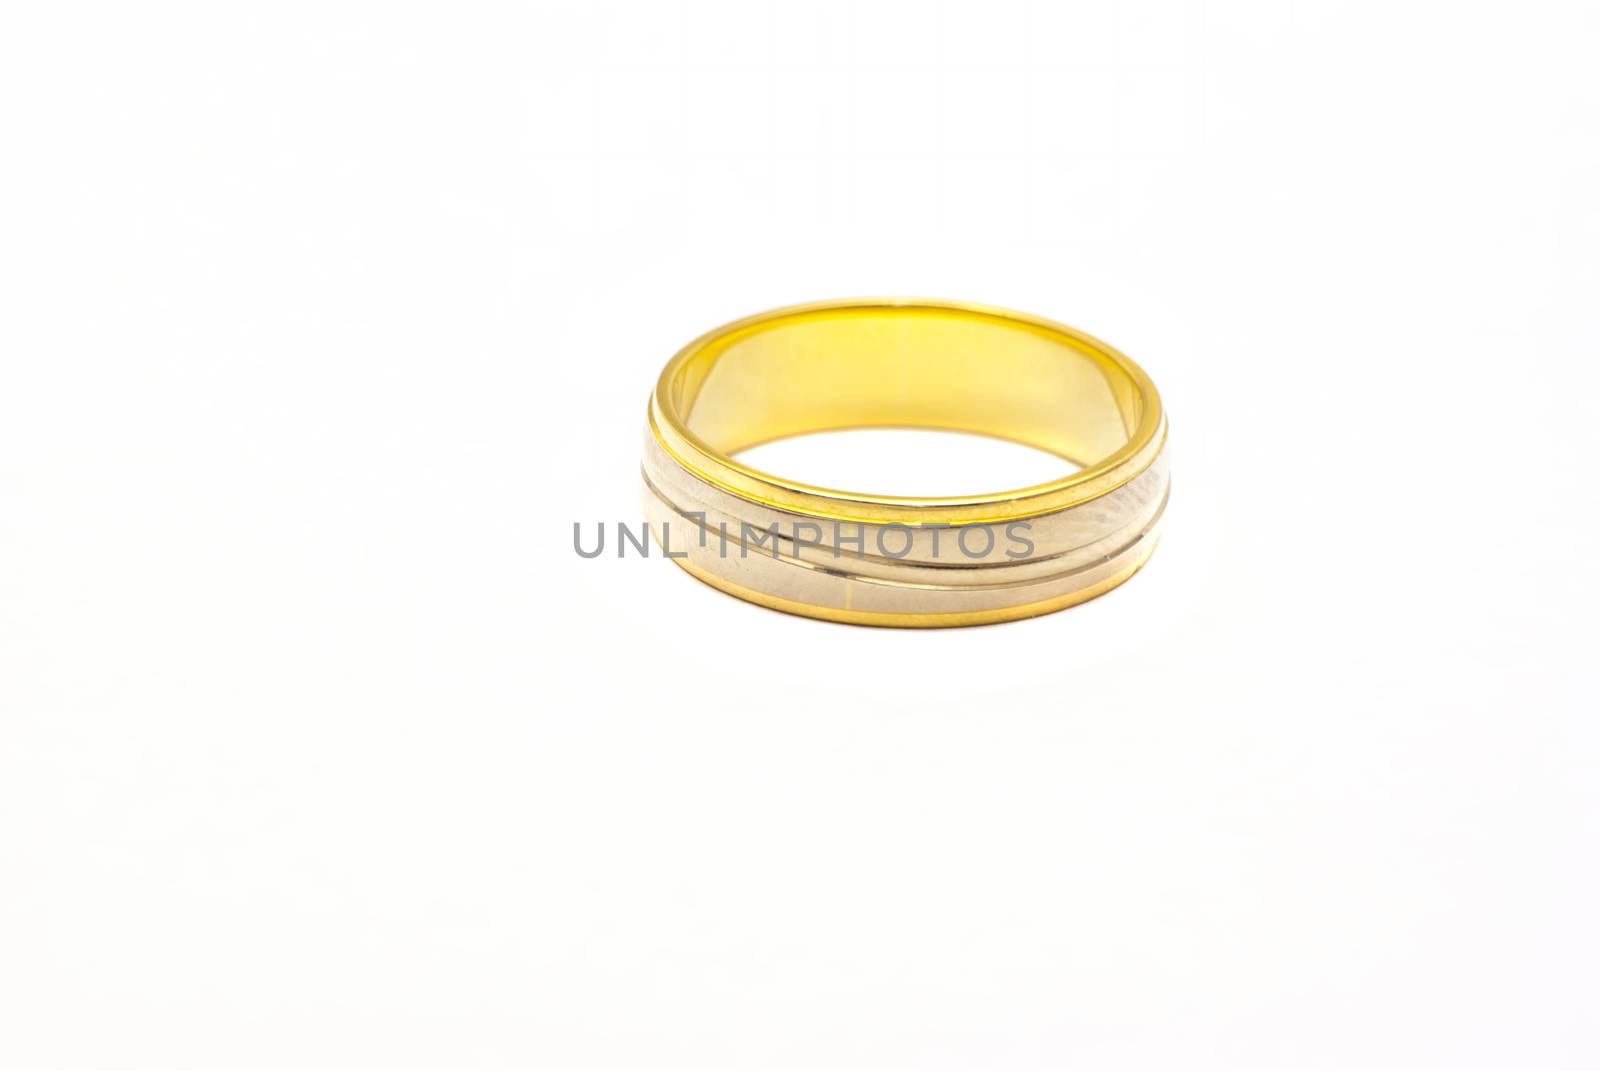 Close up image of a golden ring, yellow and white model